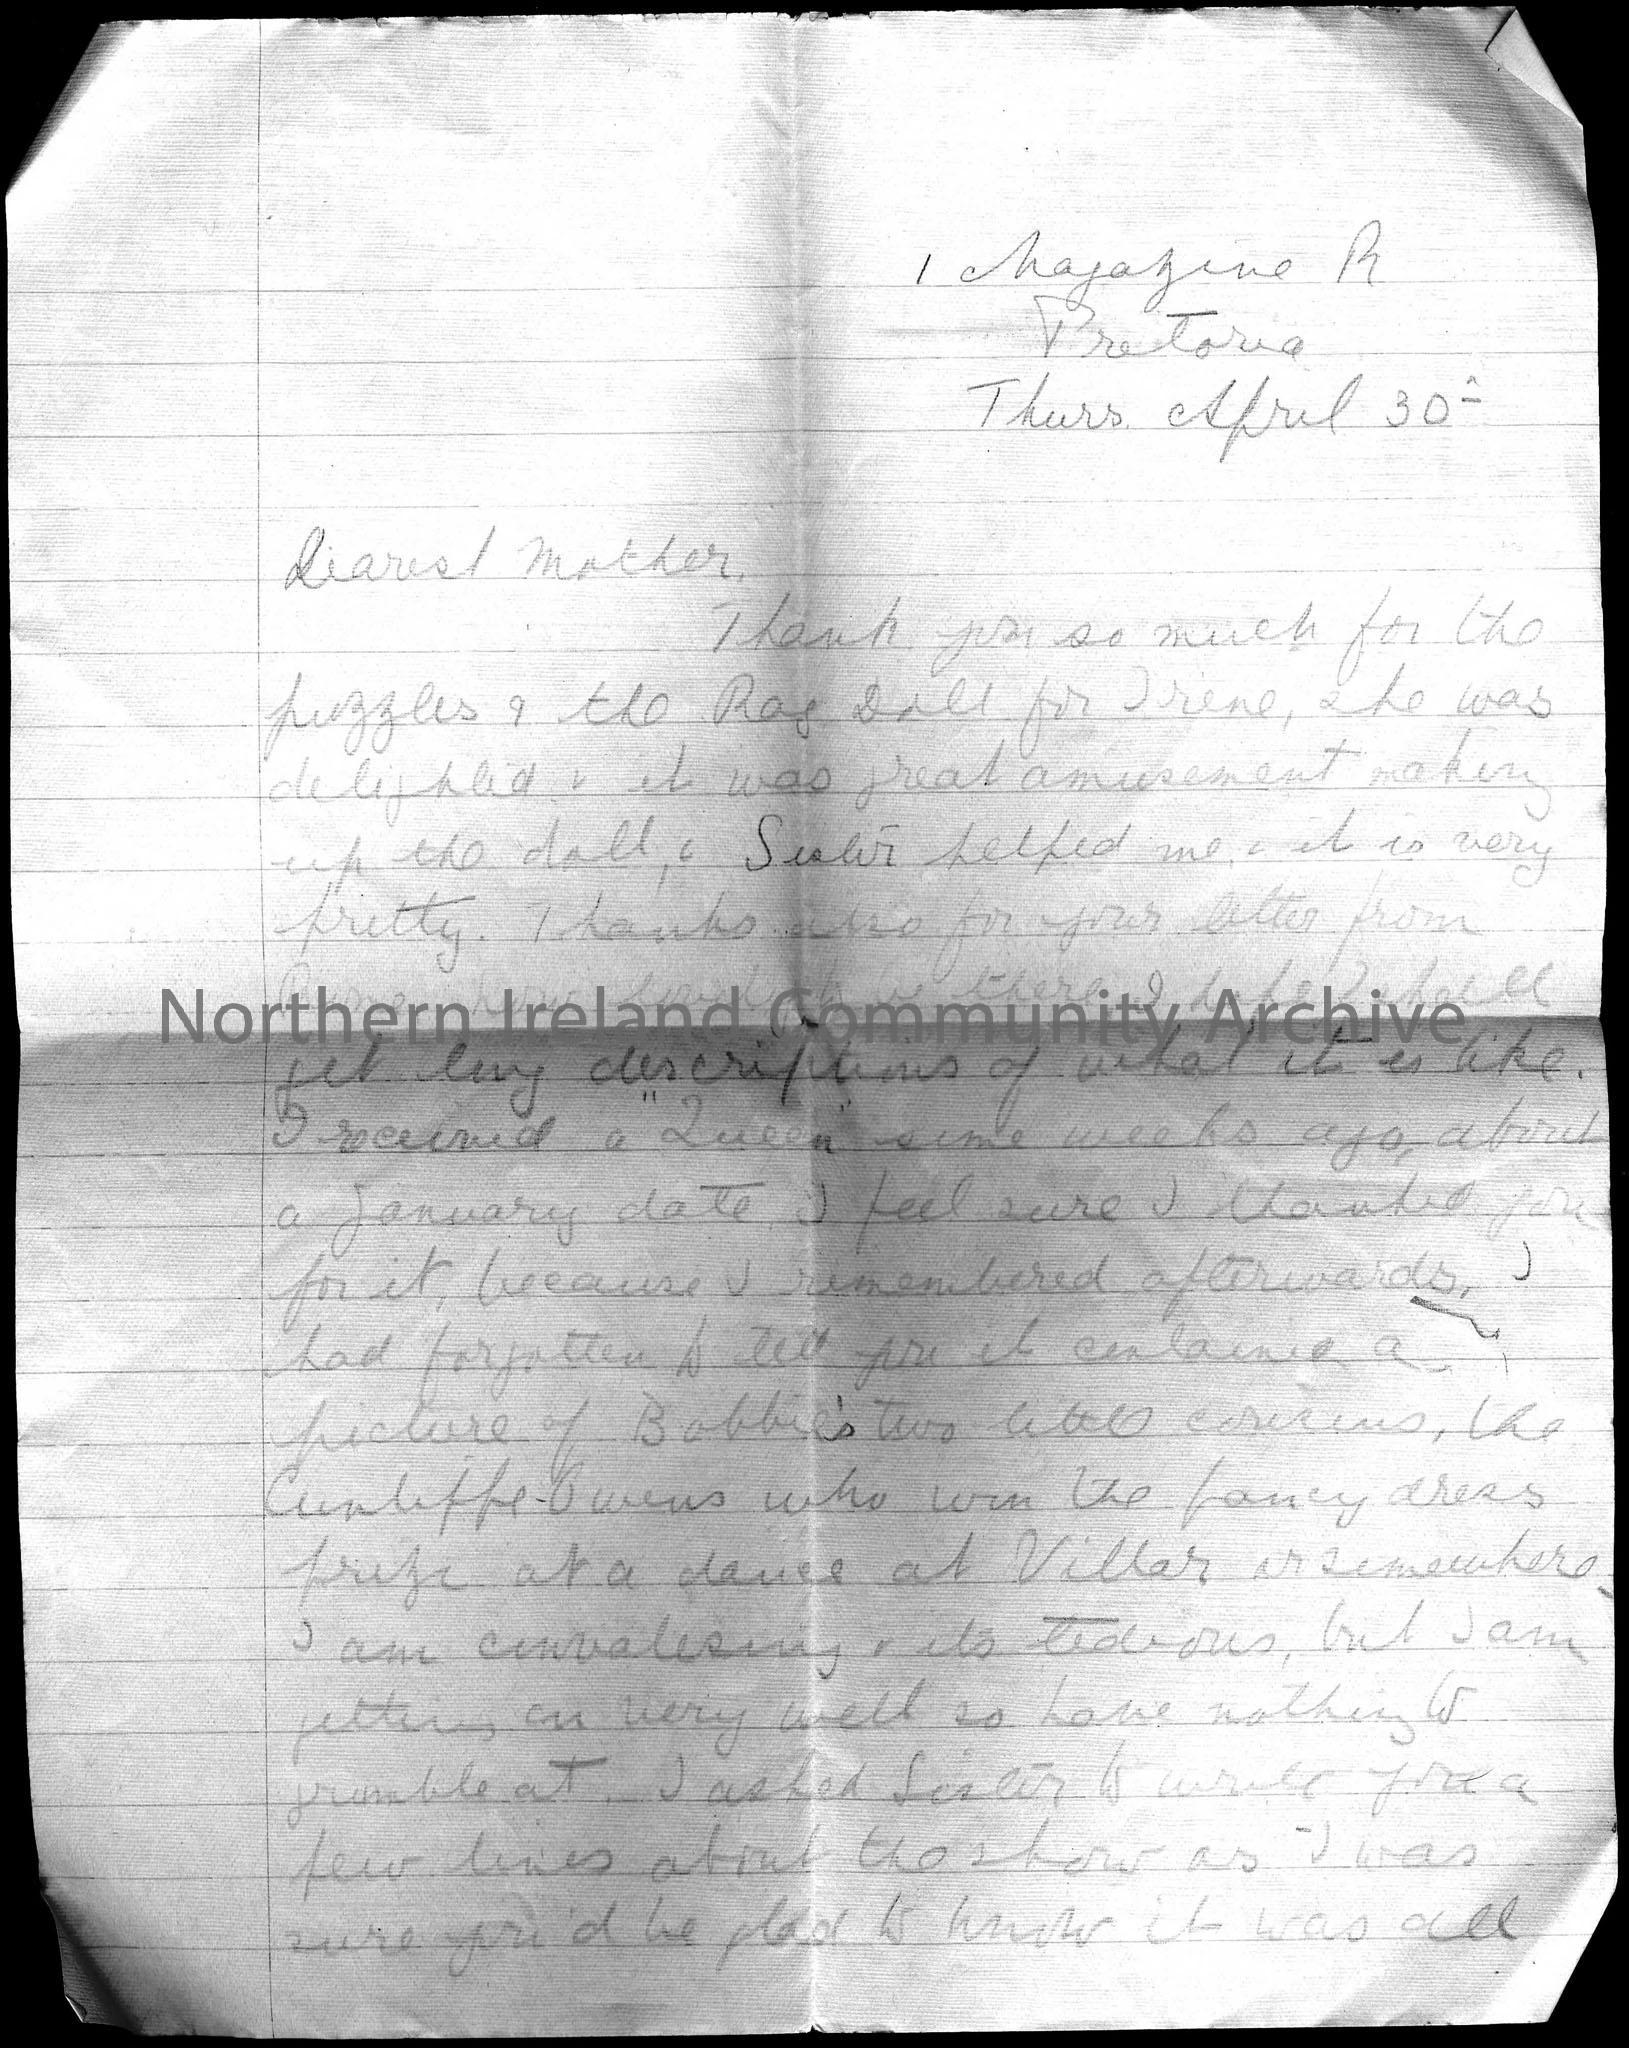 letter sent from Mrs Dorothy Arter Hezlet from 1 Magazine Road, Pretoria, dated Thurs April 30th to her mother. She asks how her mother’s time in Rome…